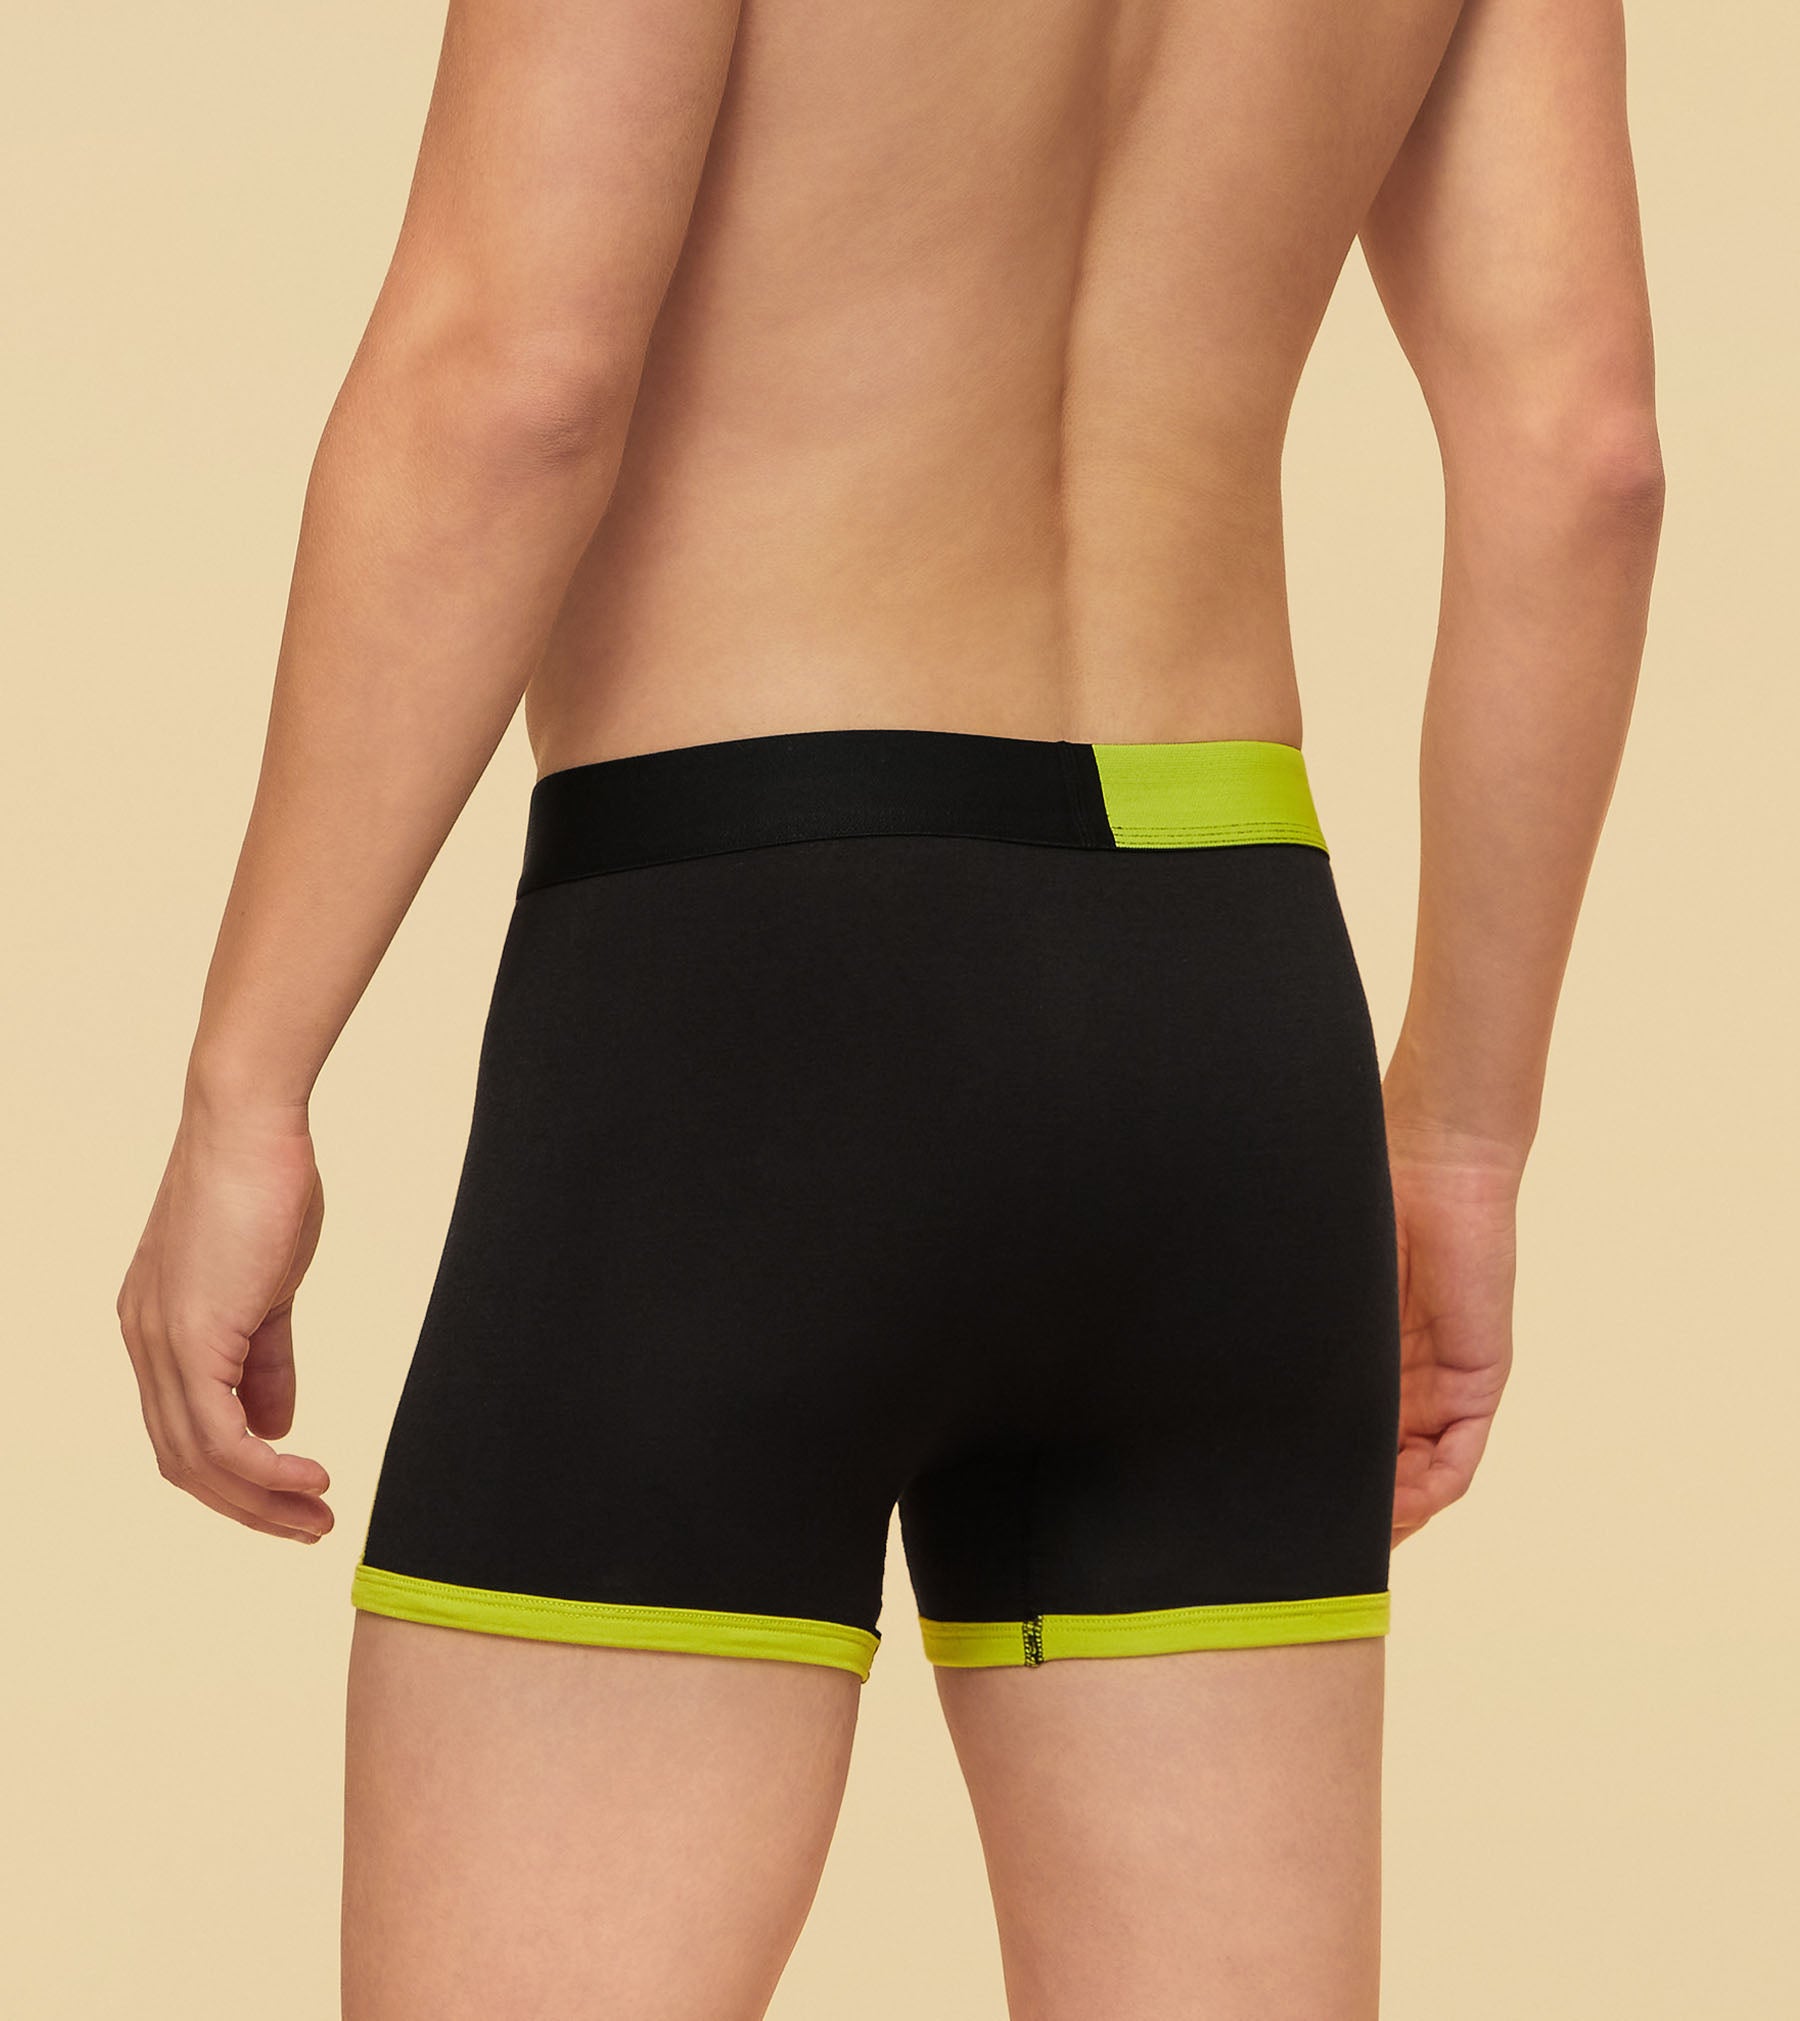 Dualist Modal Trunks For Men Pack of 2 -  XYXX Mens Apparels